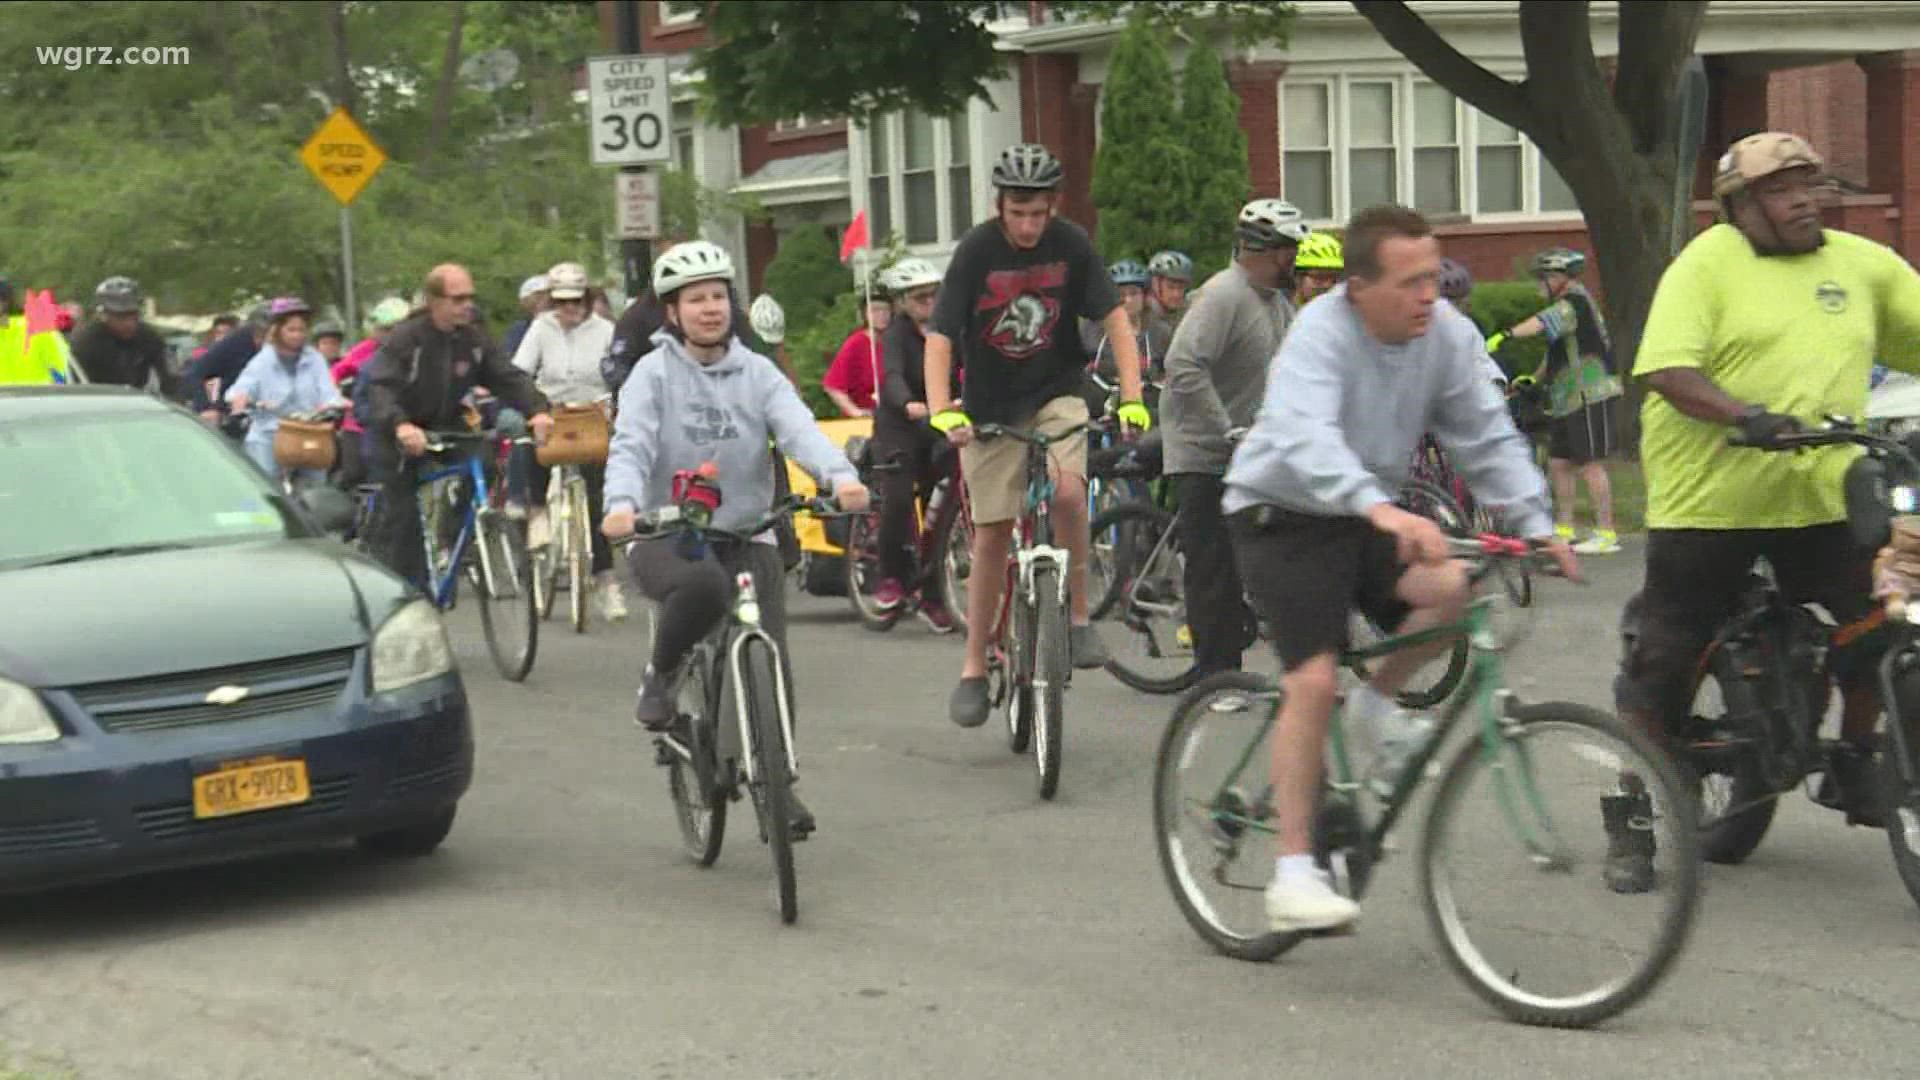 Tonight was Buffalo's weekly slow roll and this ride was all about recognizing Juneteenth.